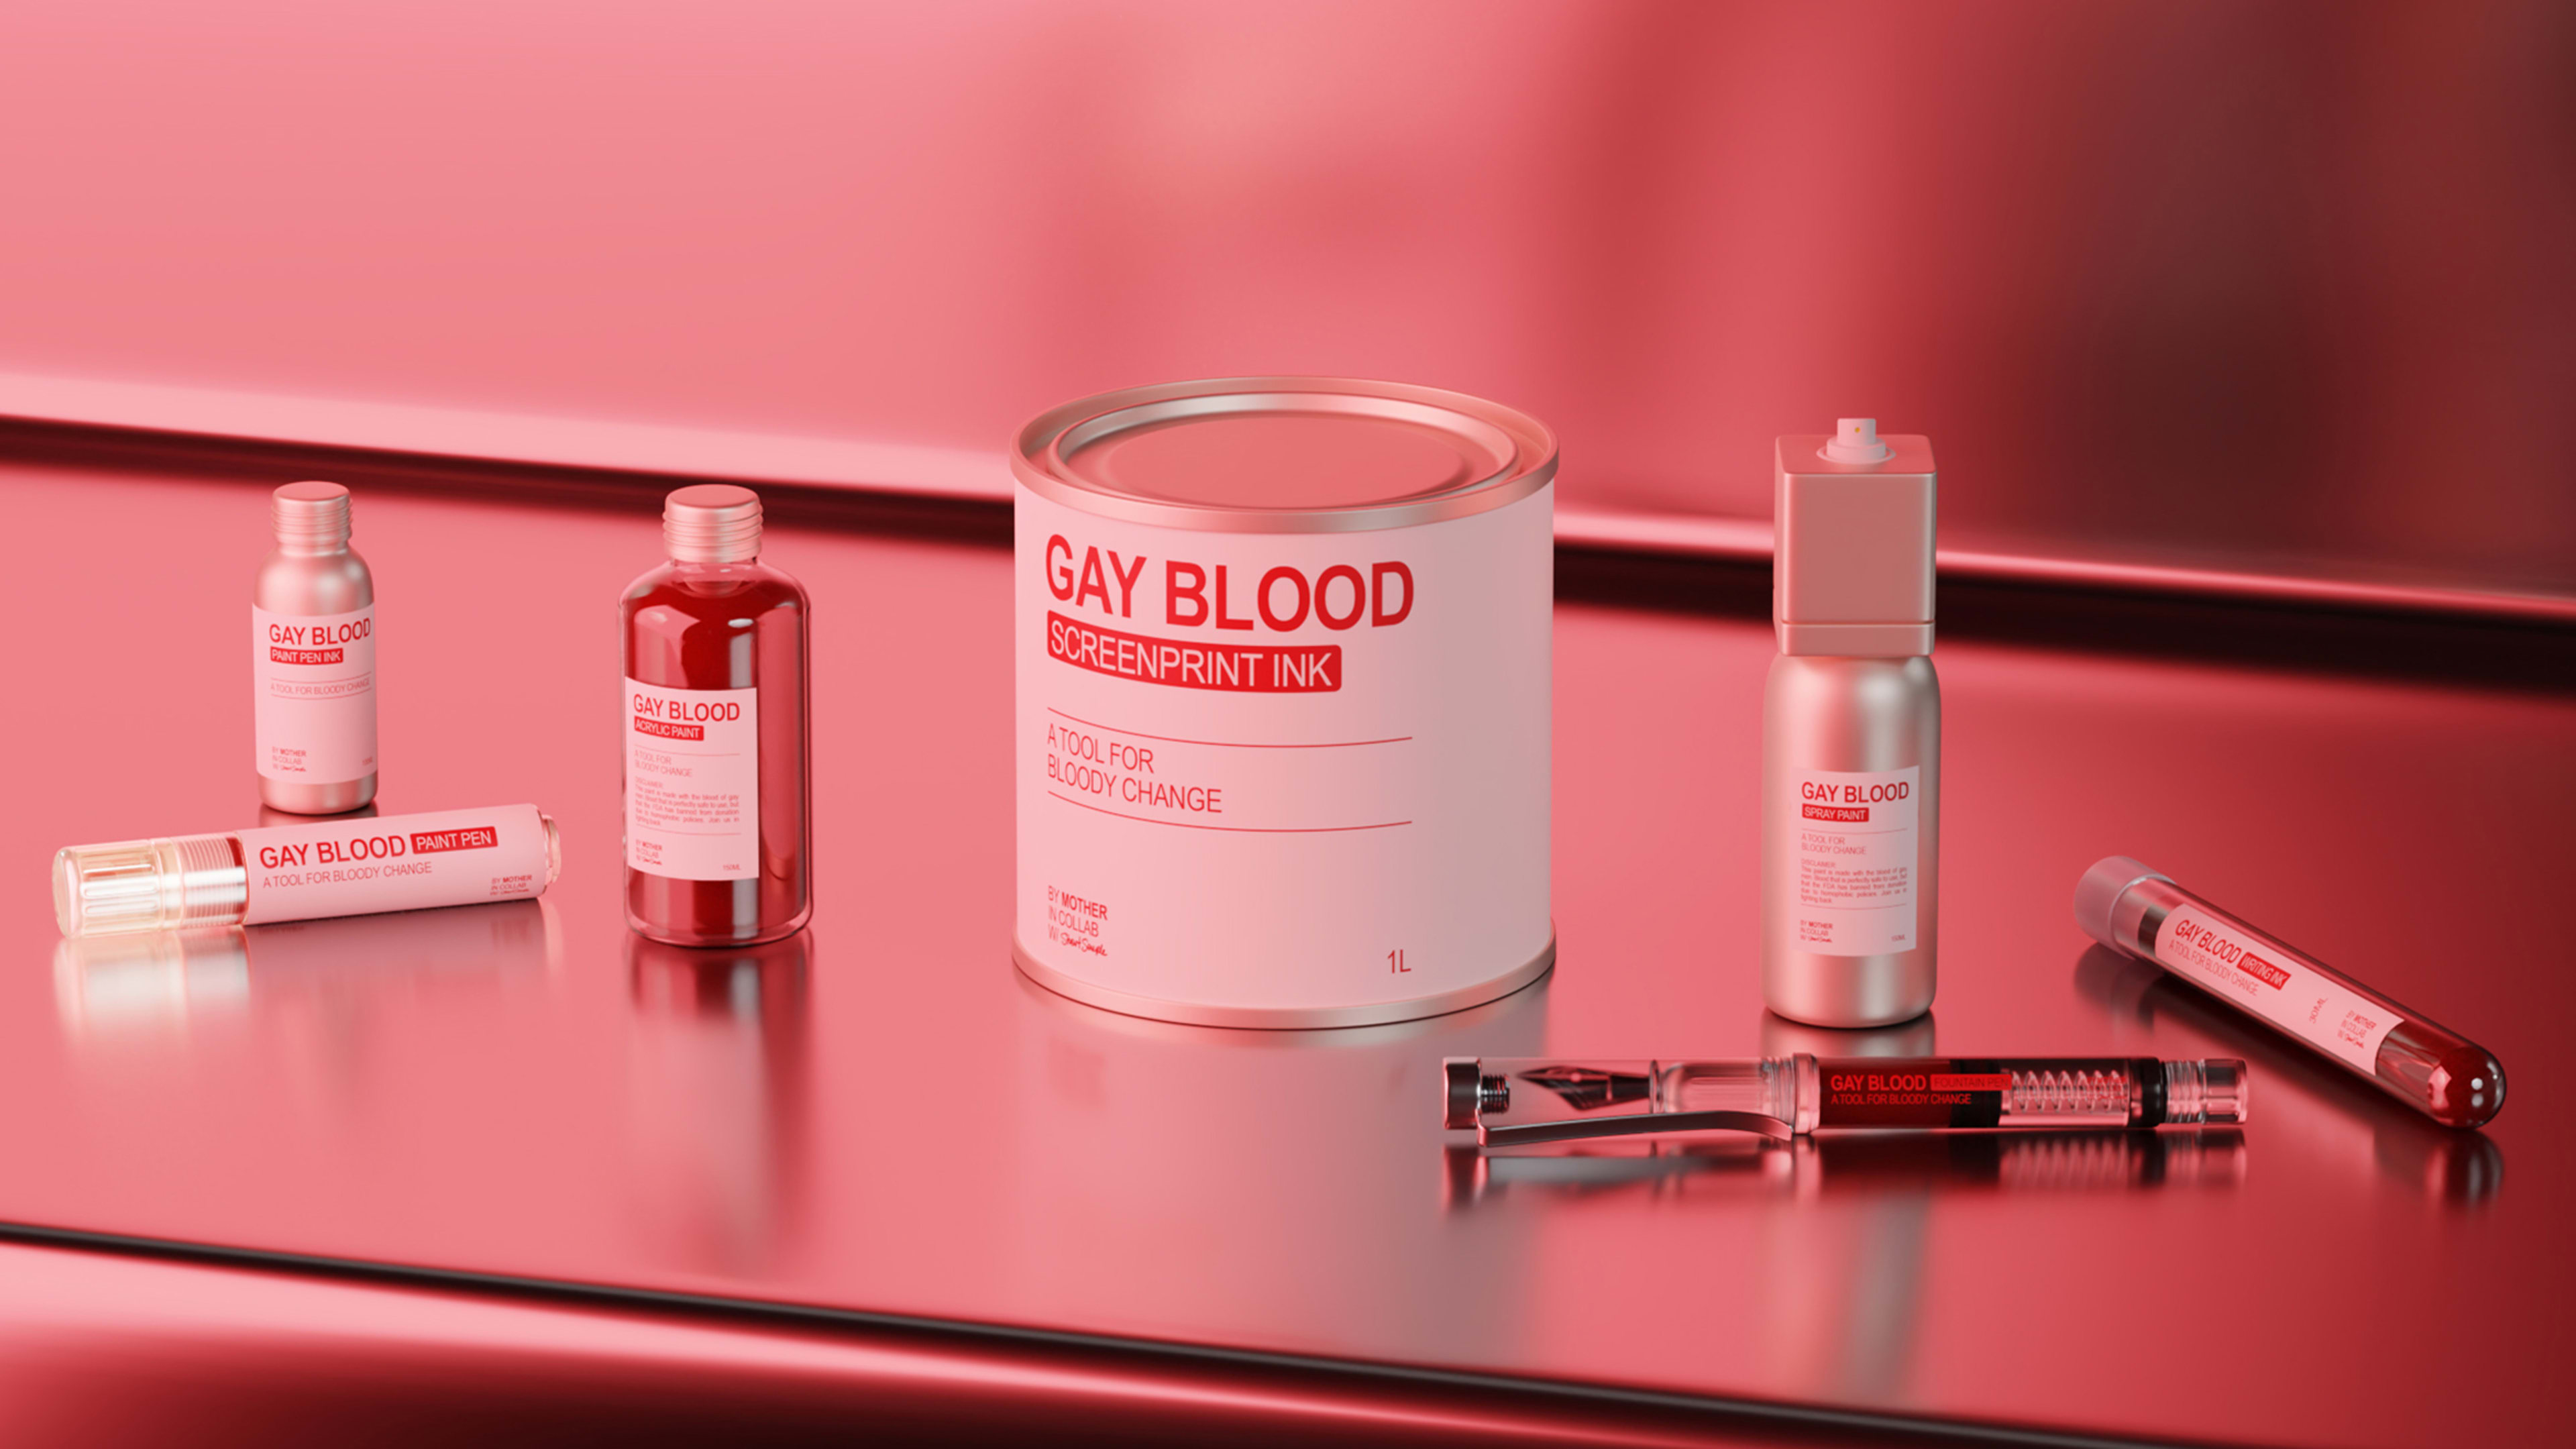 You can now buy red paint made from real blood donated by gay men